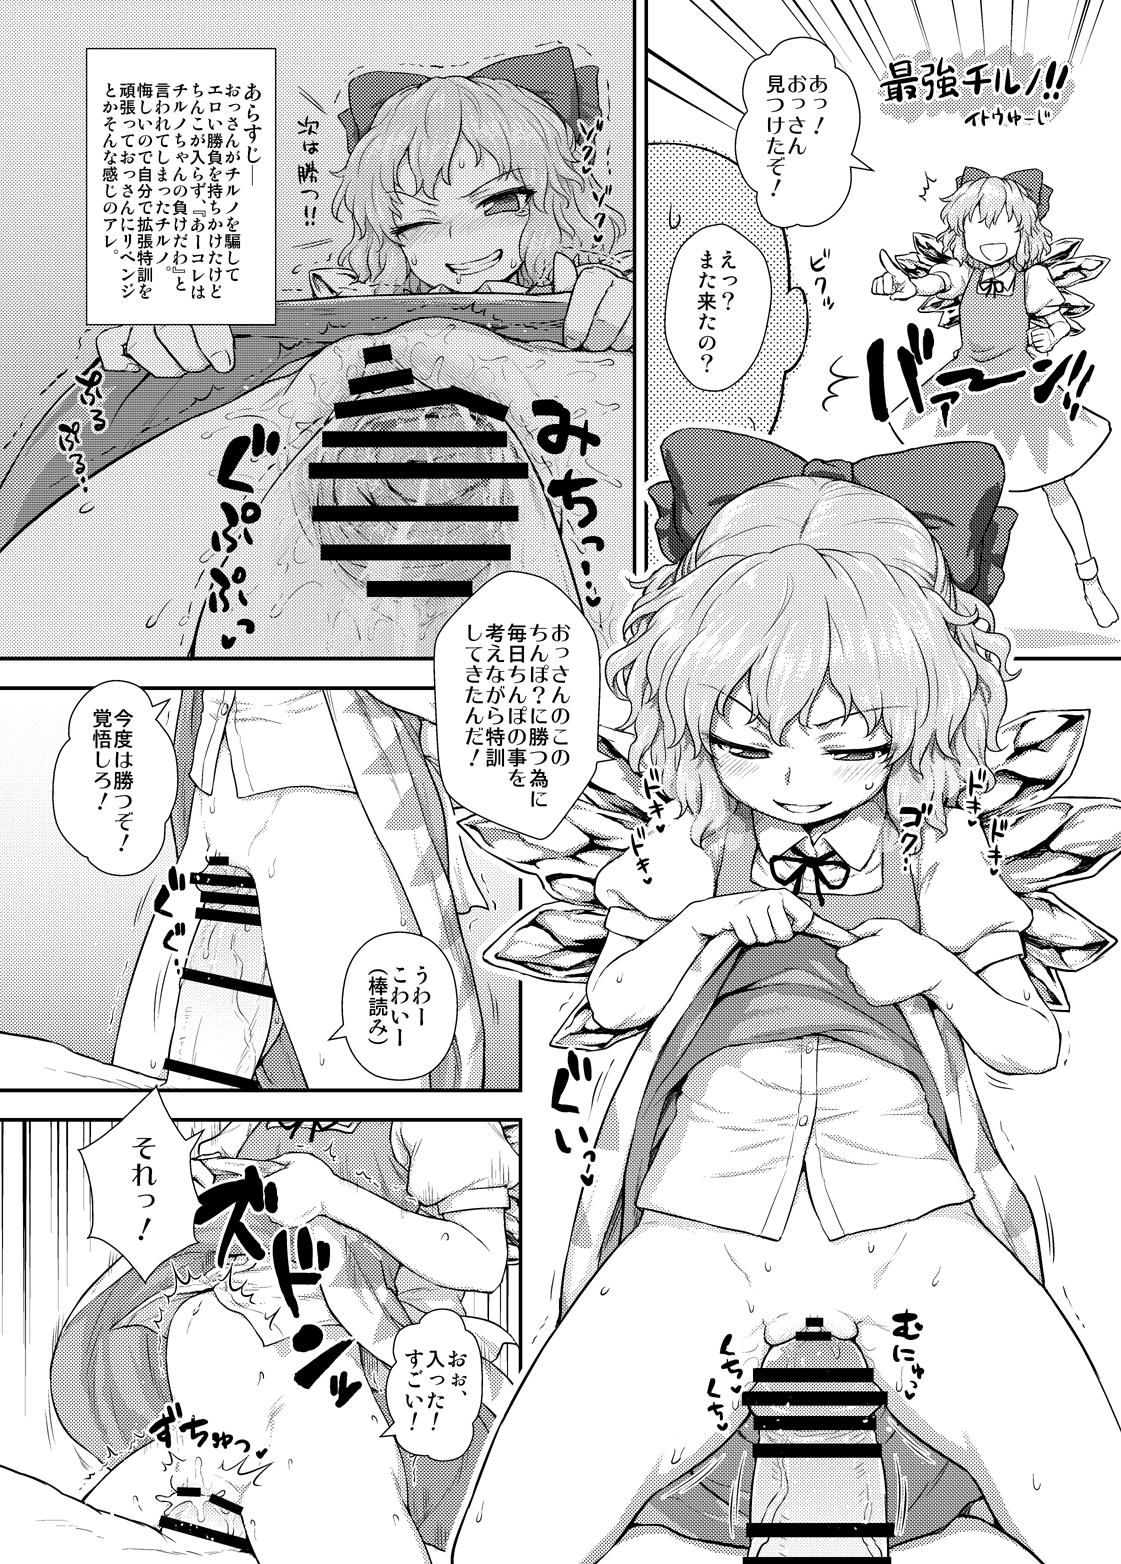 Oriental 『東方子宮脱合同誌』 - Touhou project Perfect Girl Porn - Page 1